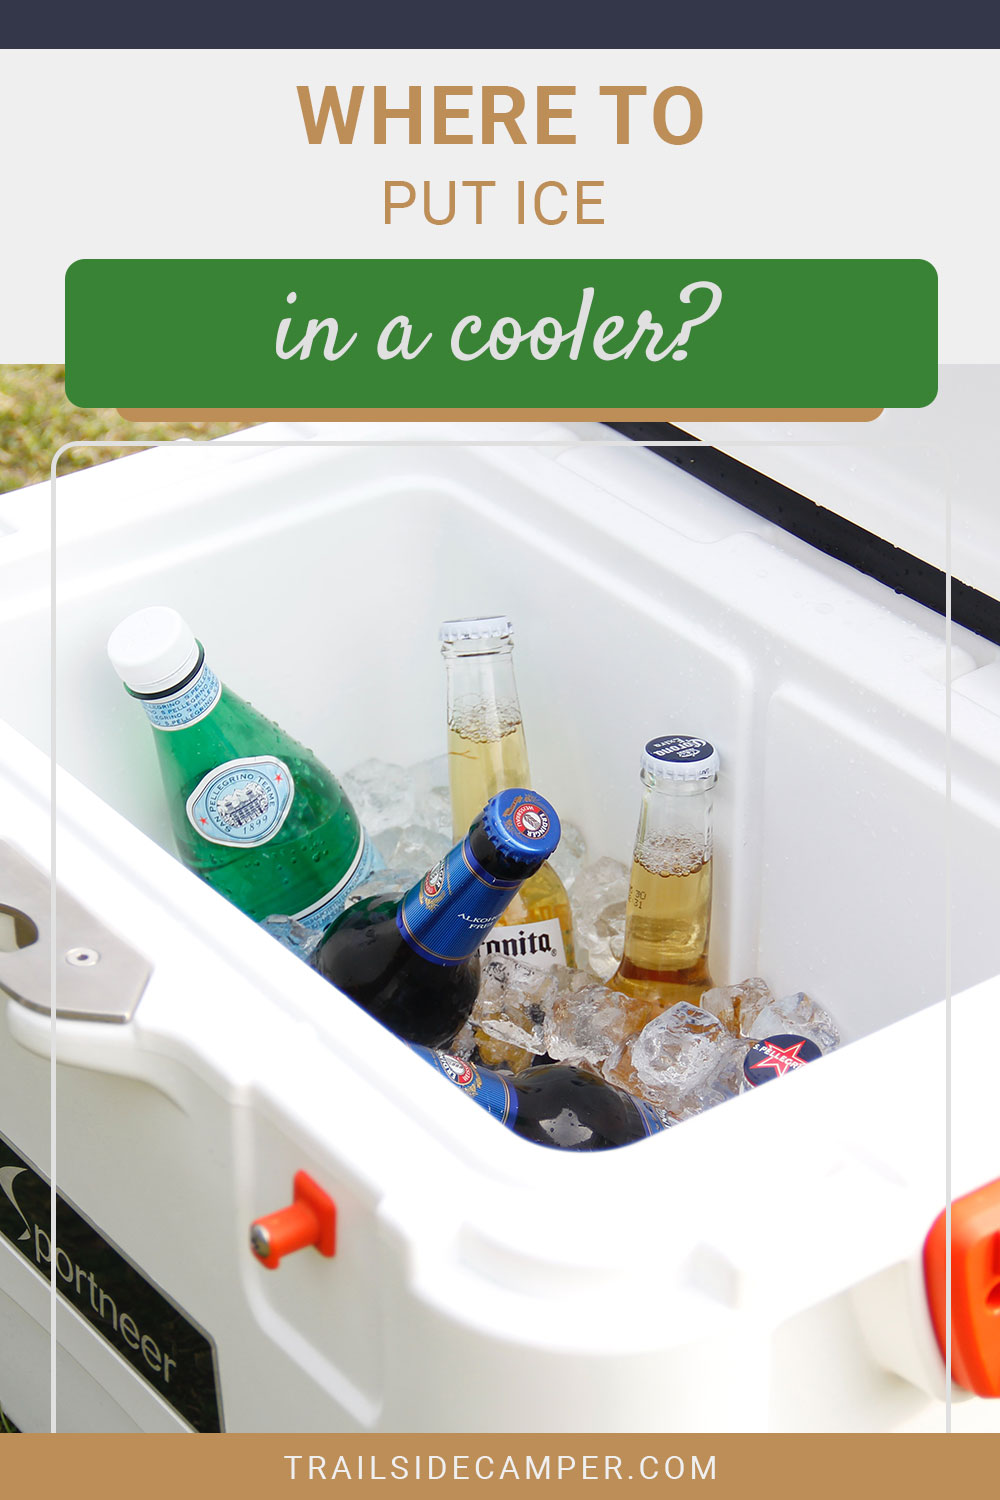 Where to put ice in a cooler?